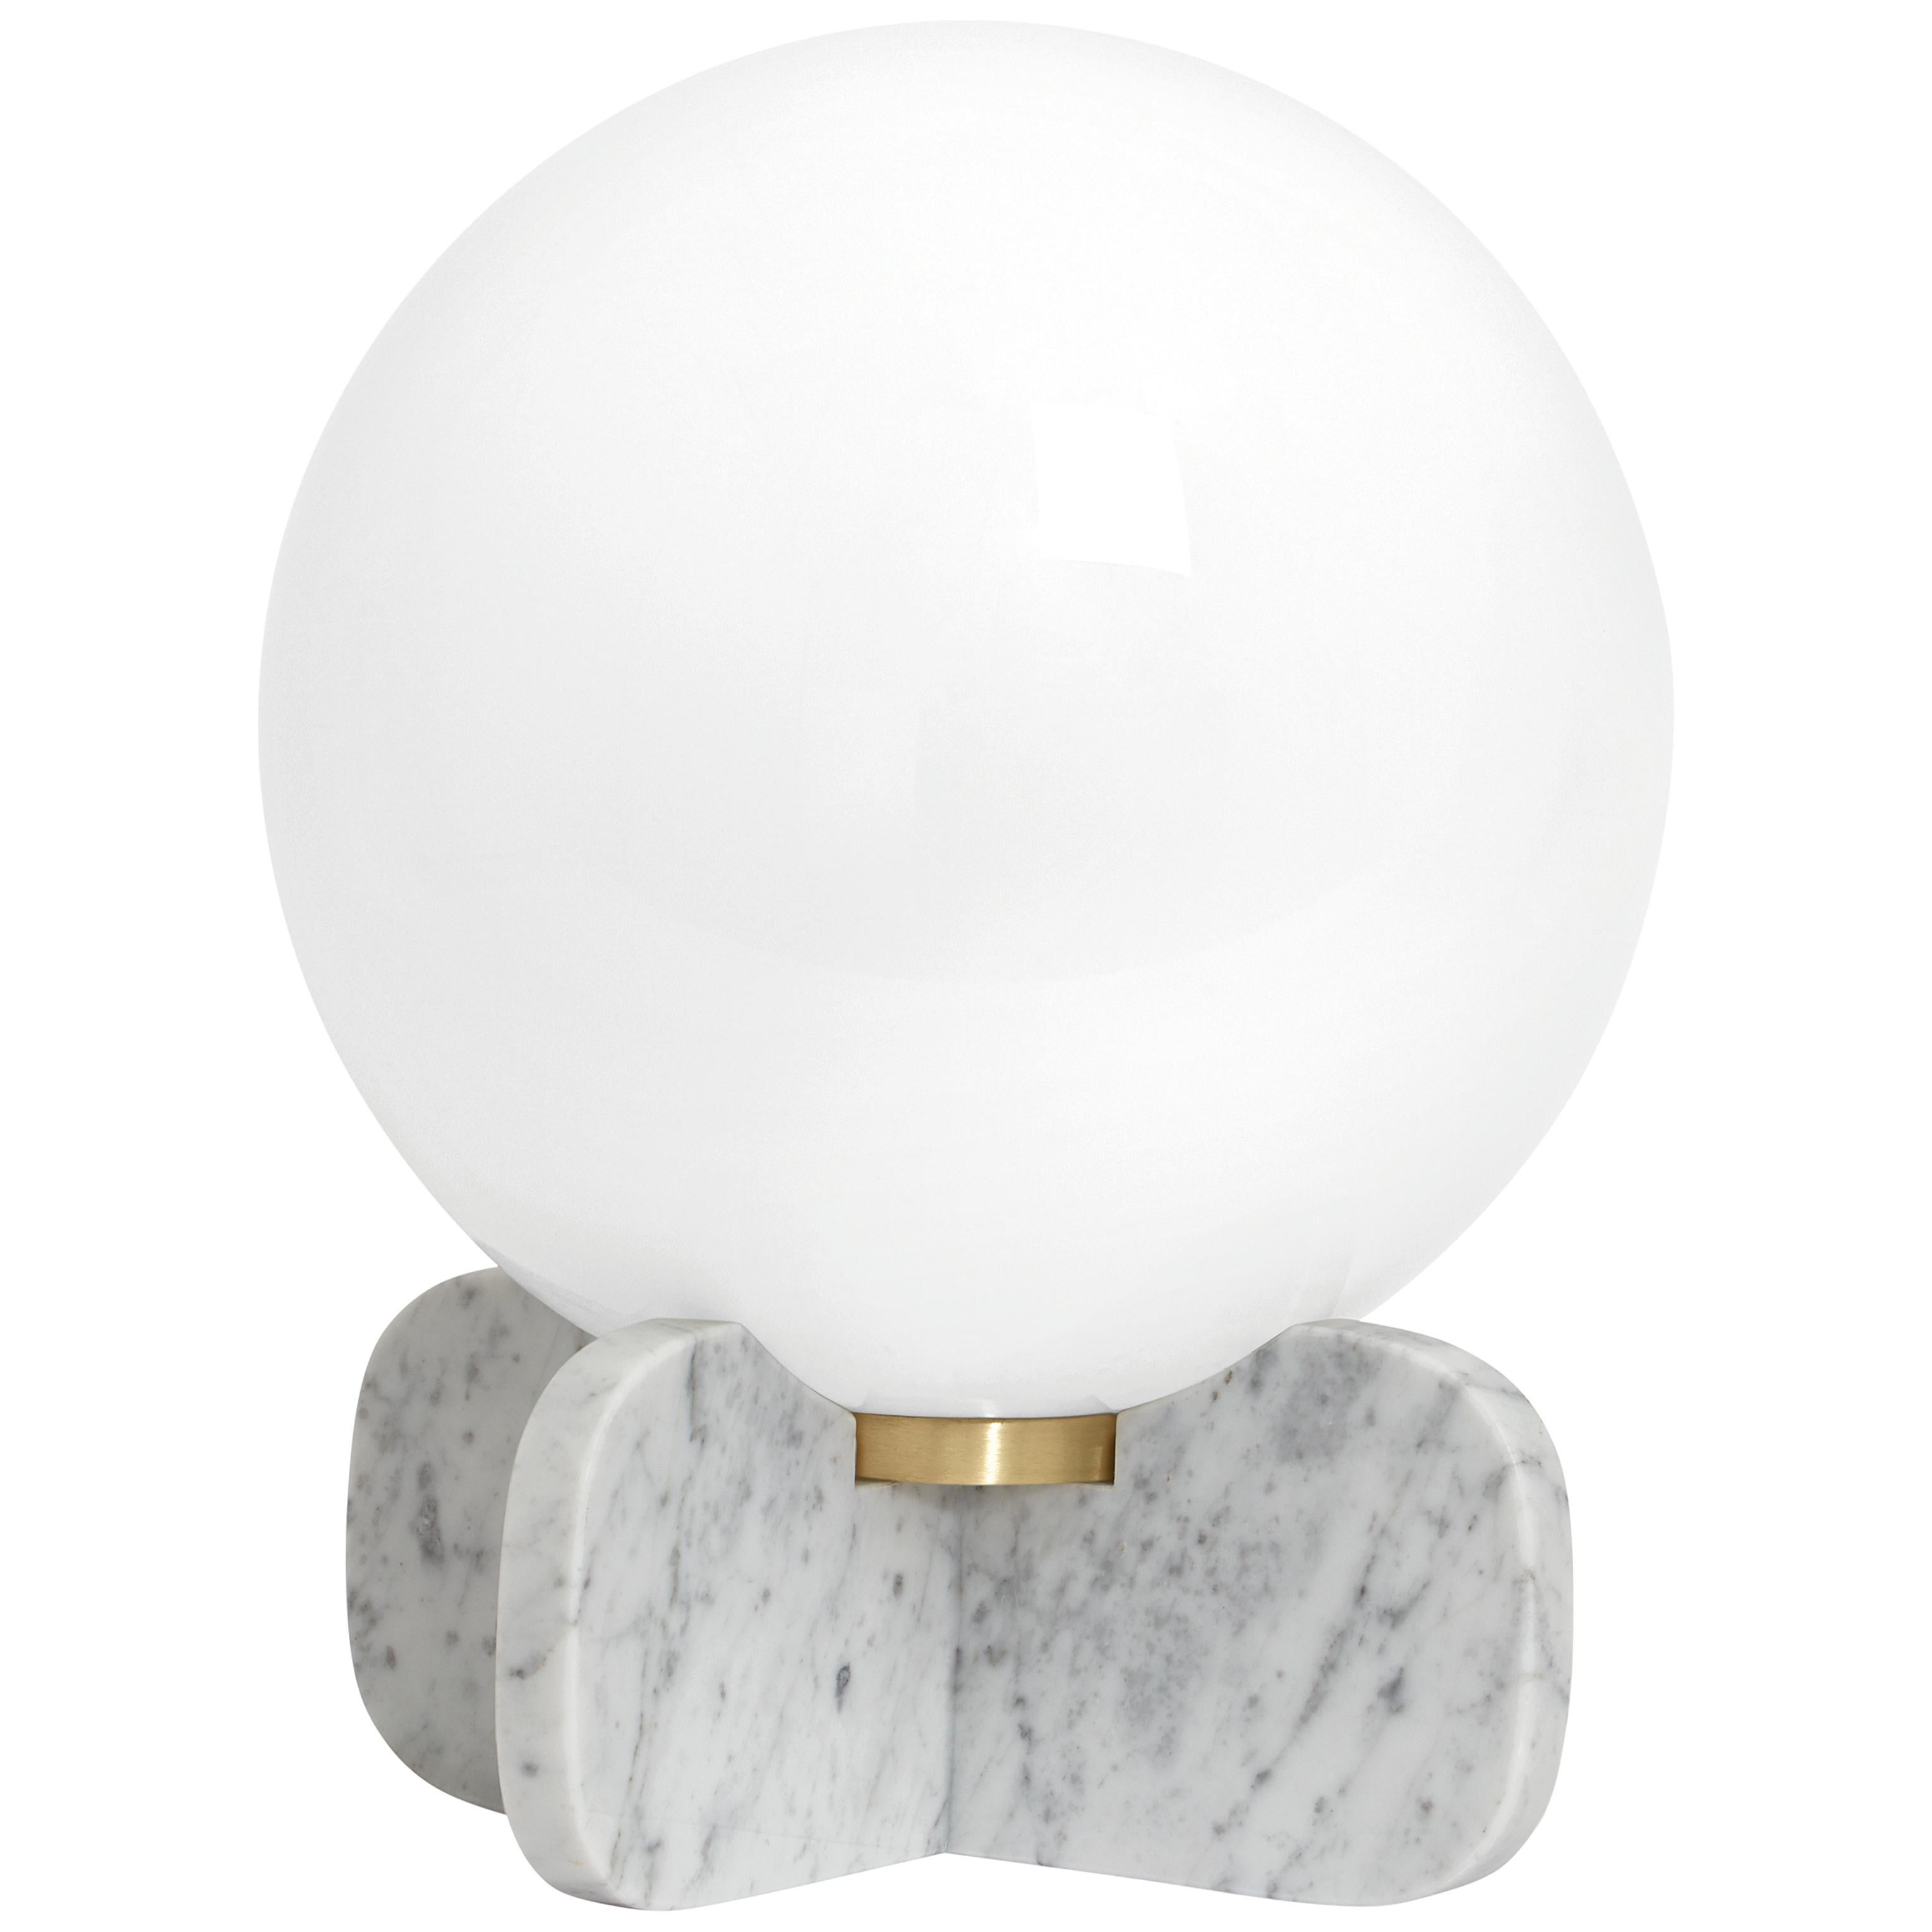 Chelsea table lamp by CTO lighting
Materials: polished white carrara marble with satin brass and opal glass shade
Dimensions: W 30 x D 30 x H 38 cm

Also available in black marquina.

1 x E26, 60w max (or 8w LED 2700k)
weight 6kg